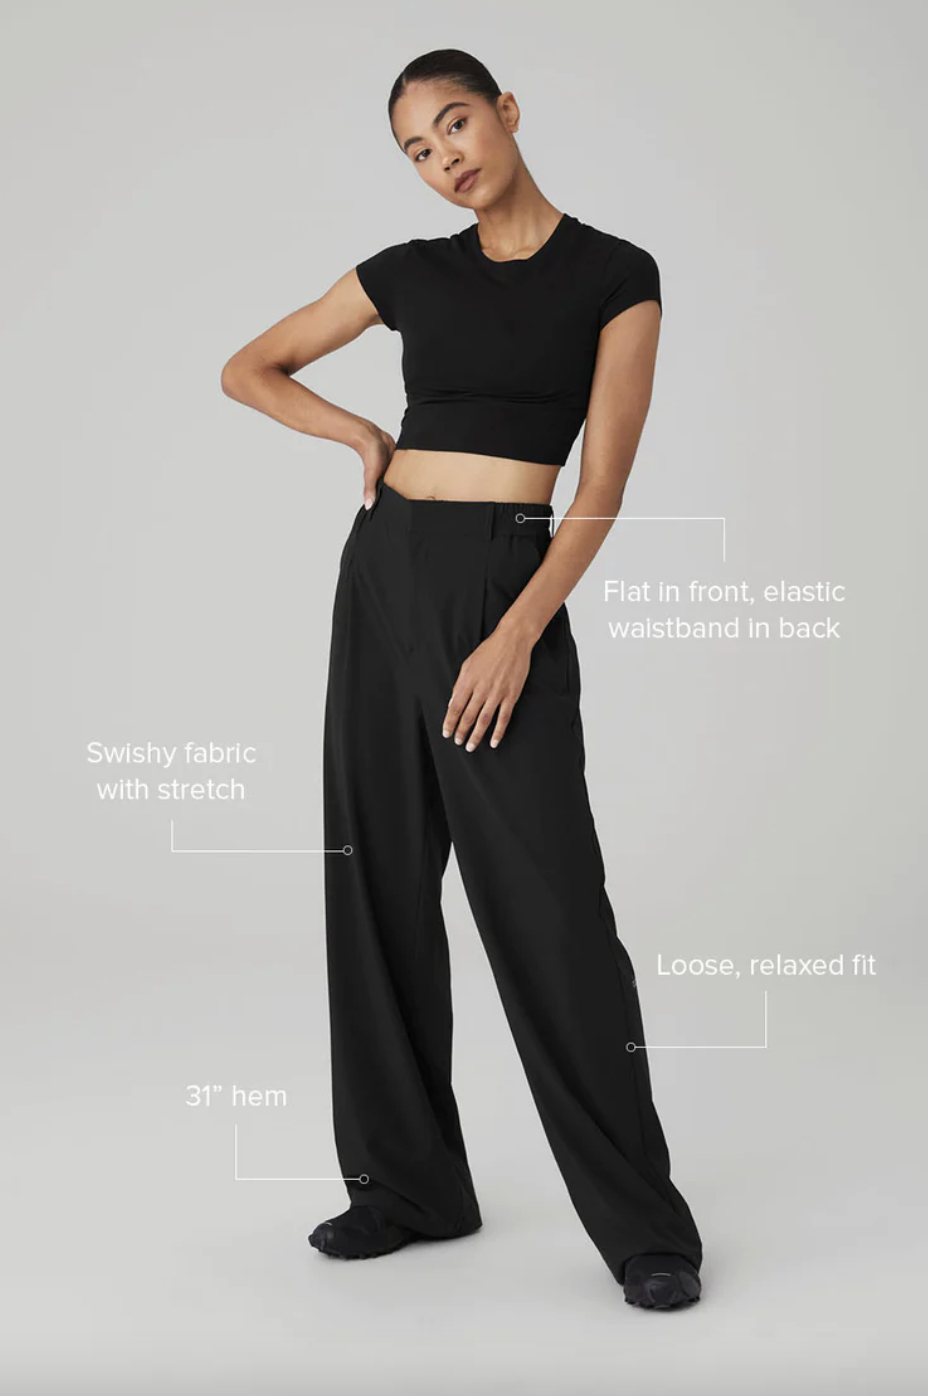 Woman modeling black crop top and wide-leg pants with descriptive text on fit and design